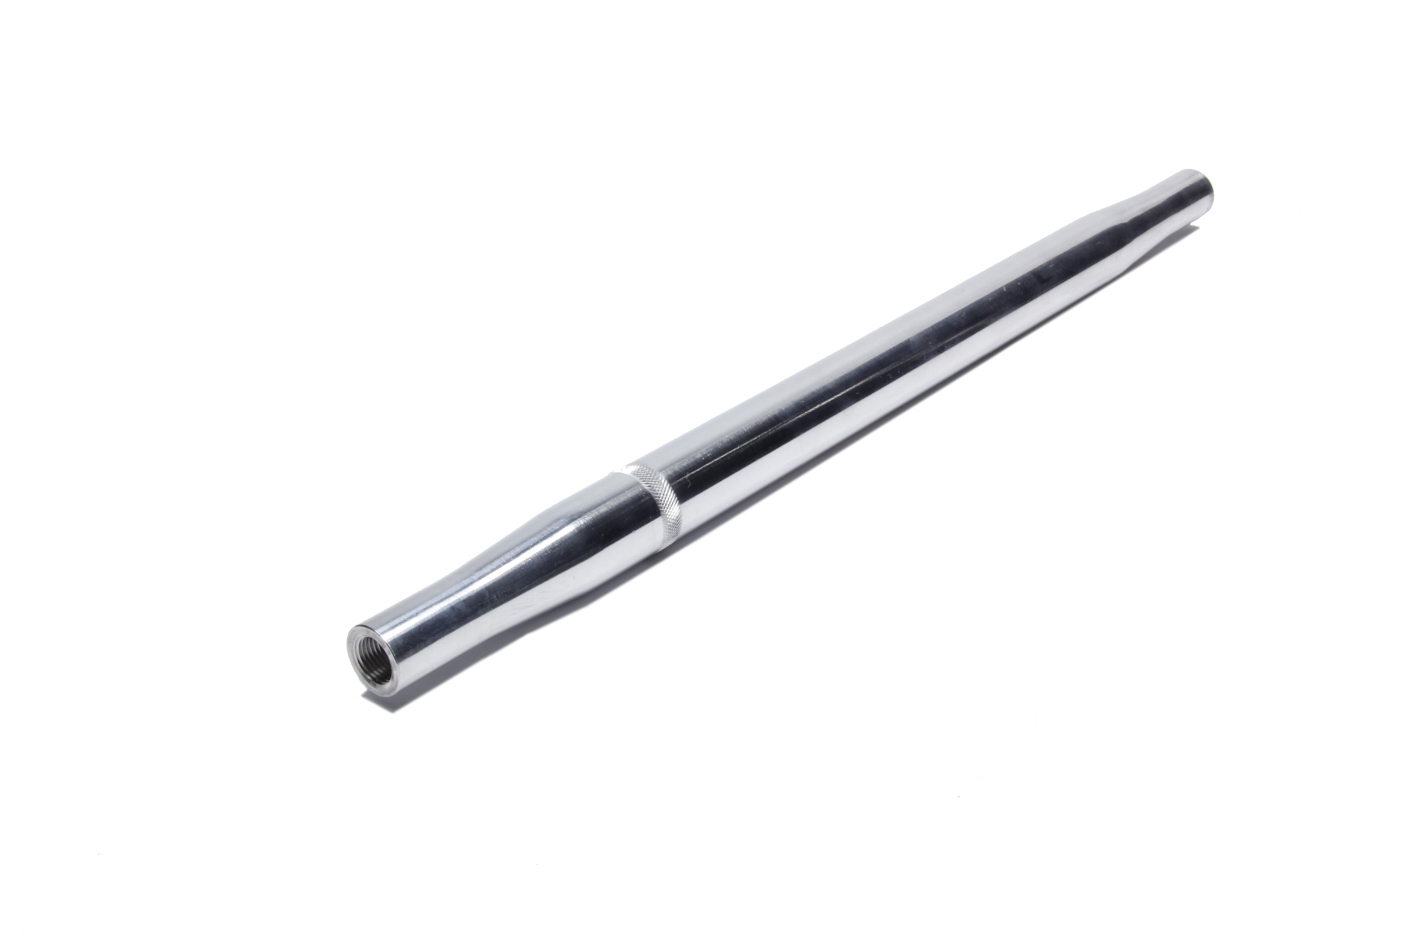 M AND W ALUMINUM PRODUCTS Swaged Rod 1.125in. x 28in. 5/8in. Thread P/N - SR-28L-POL